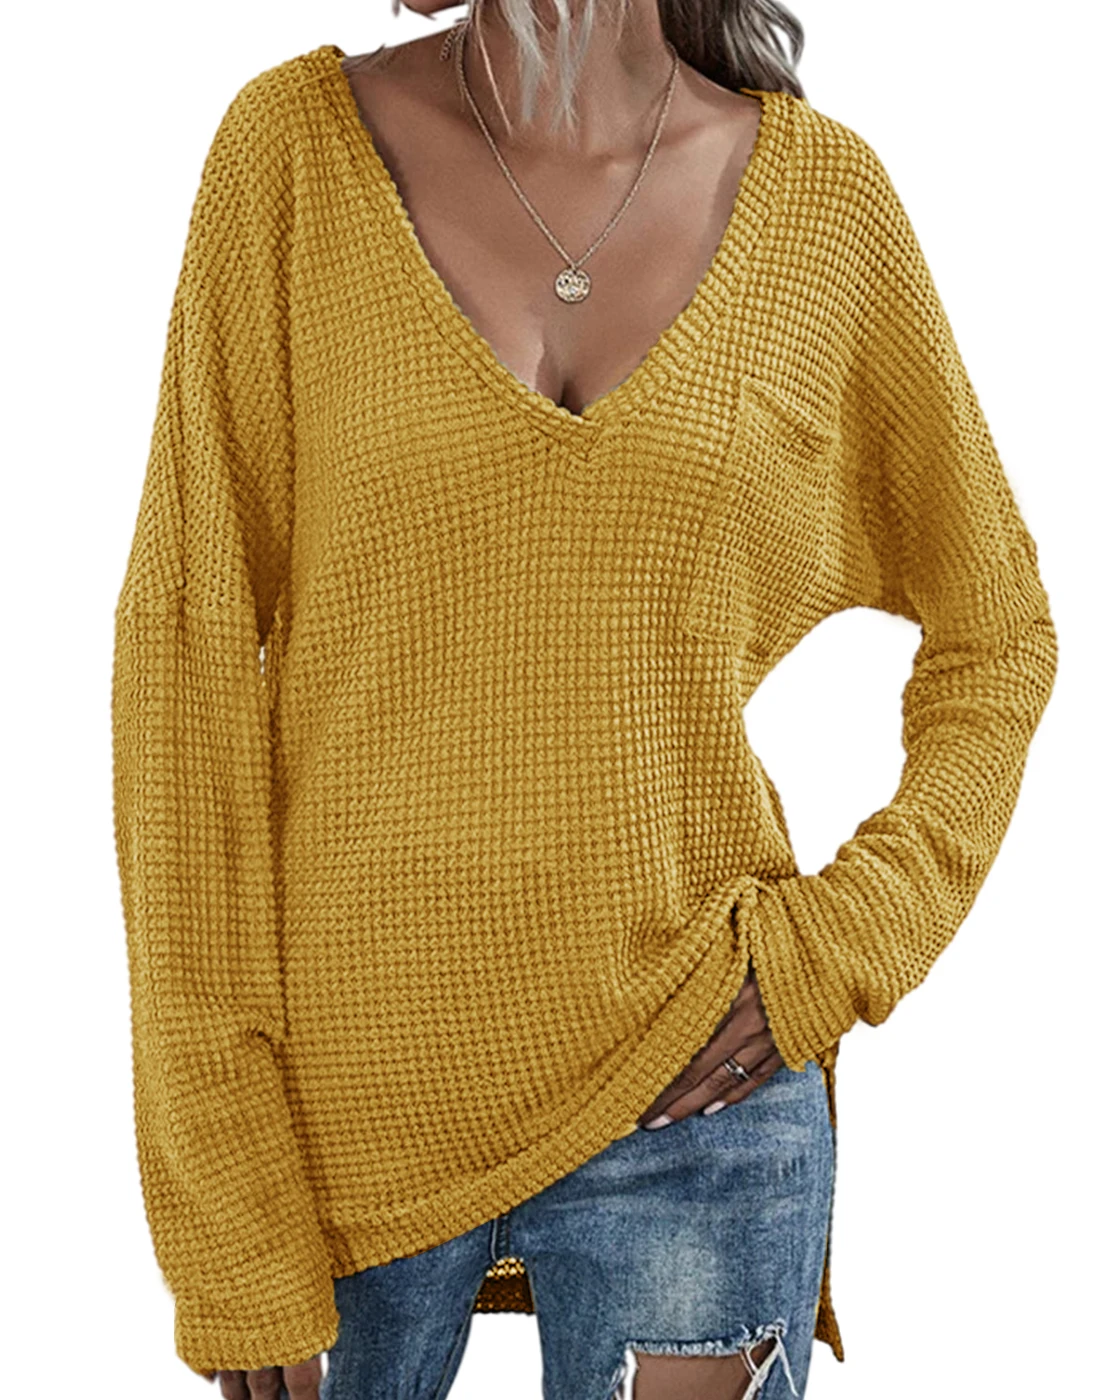 

V Neck Cotton-Blend Shirts Tops Waffle Knit Long Sleeve Loose Plain Pullover Jumpers